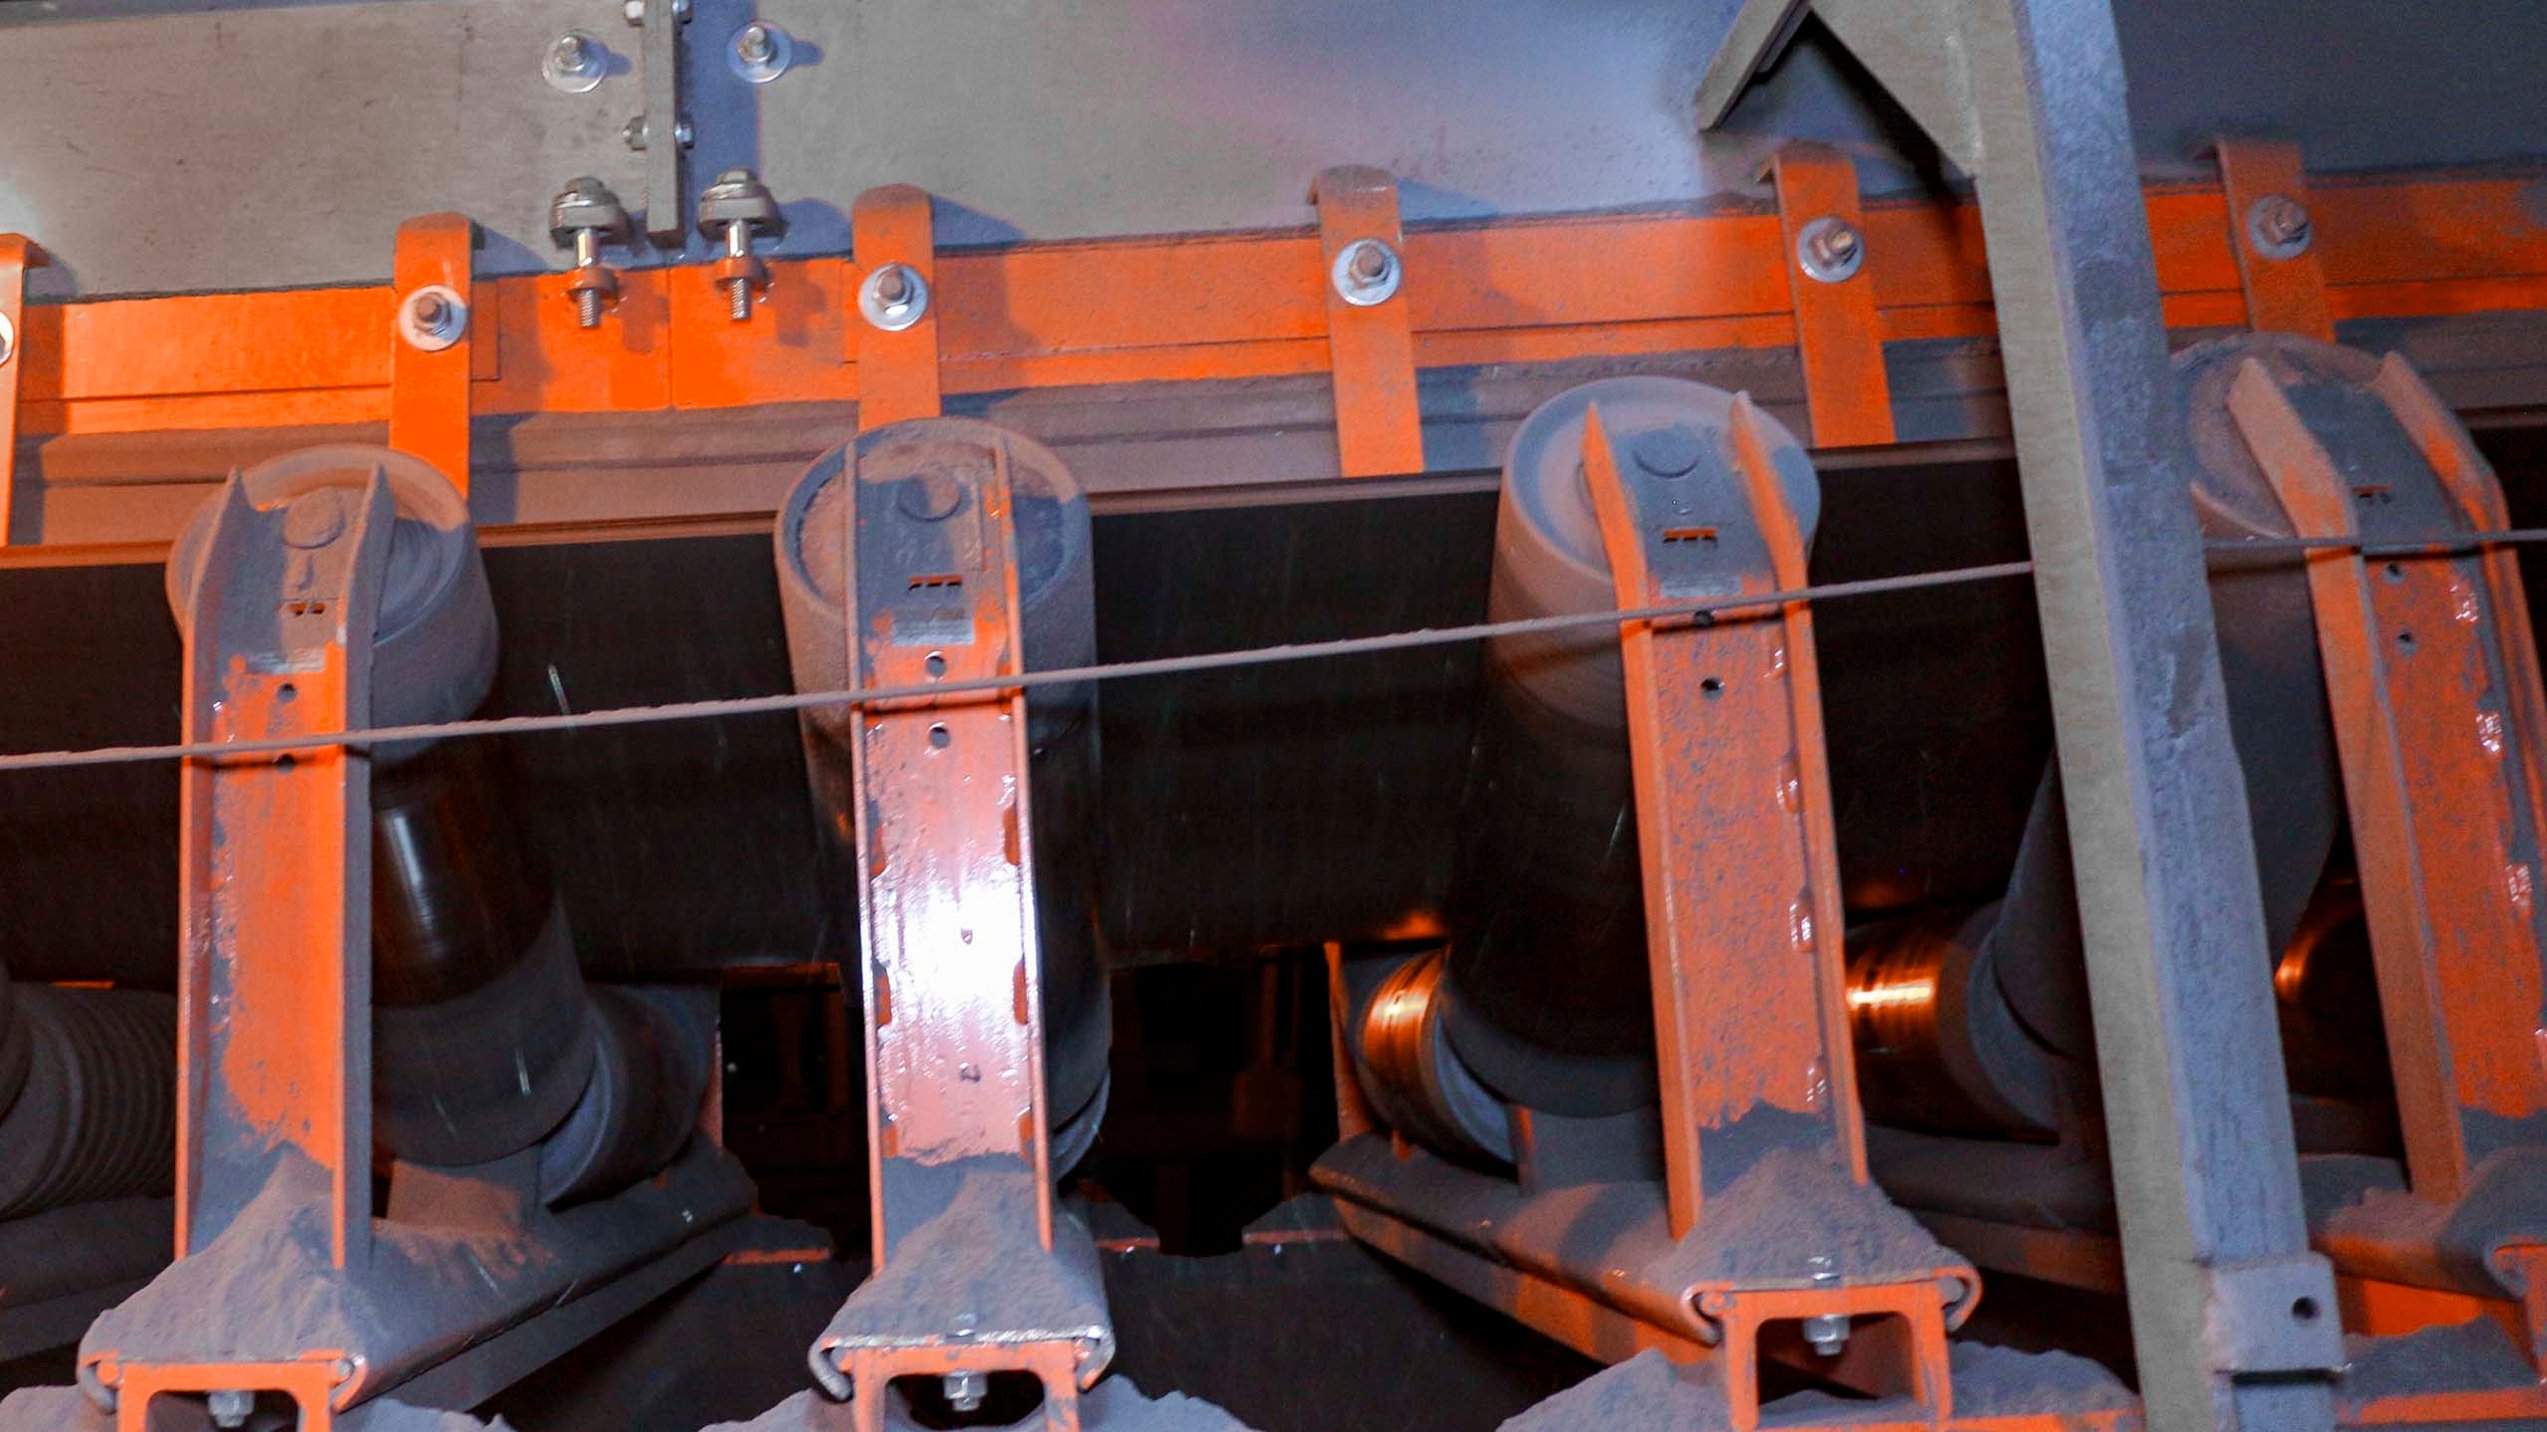 Properly supporting and sealing conveyor belts is essential ro keeping material on the belt